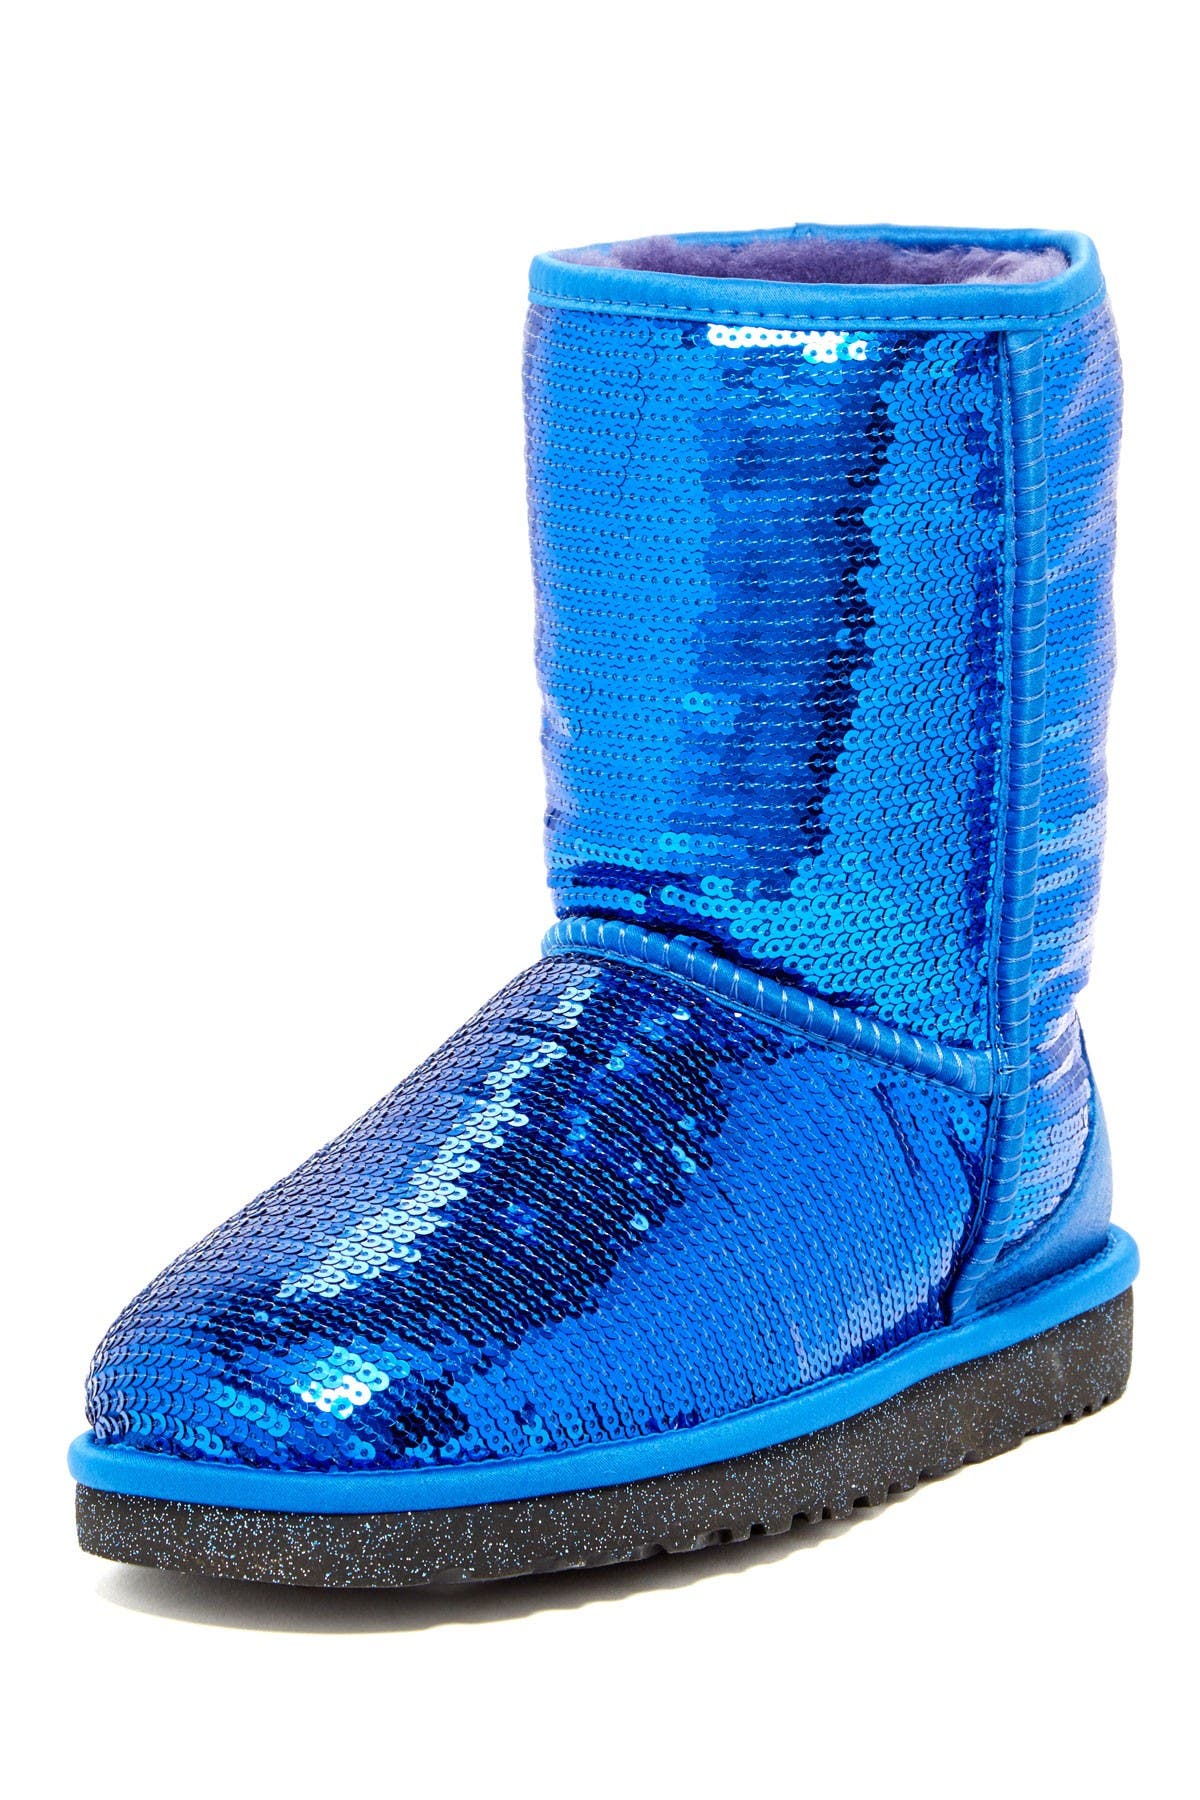 navy blue sequin ugg boots